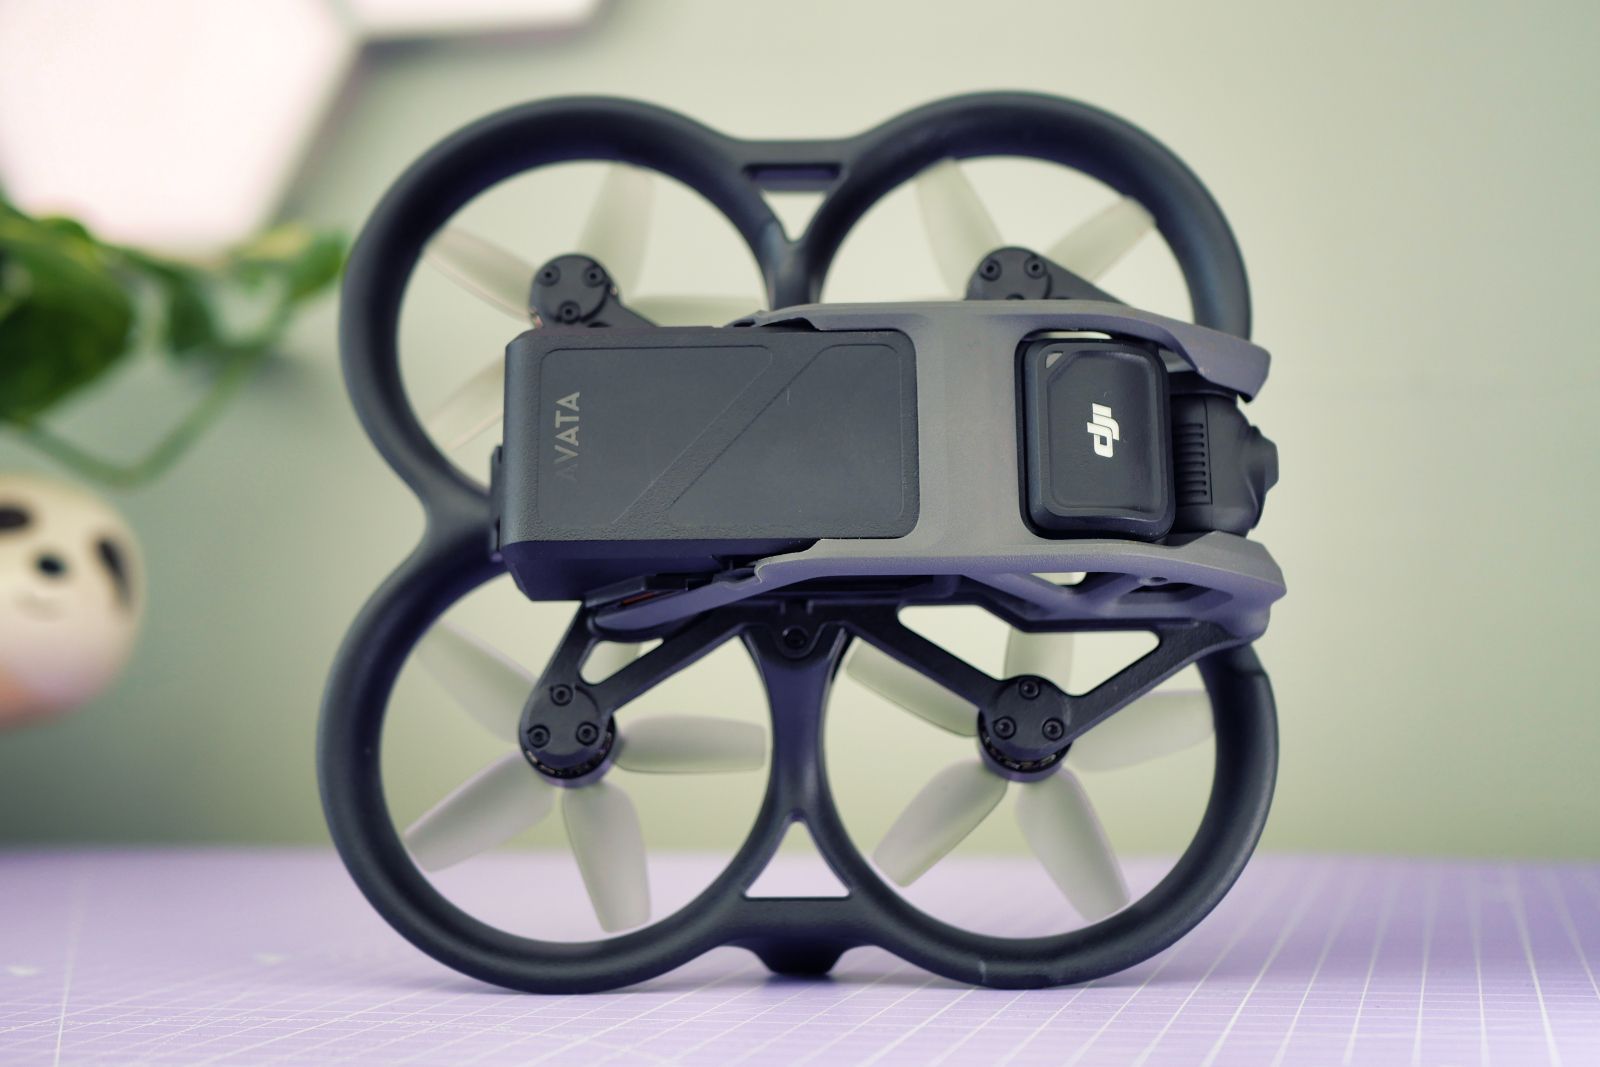 DJI Avata review: The cinewhoop goes mainstream